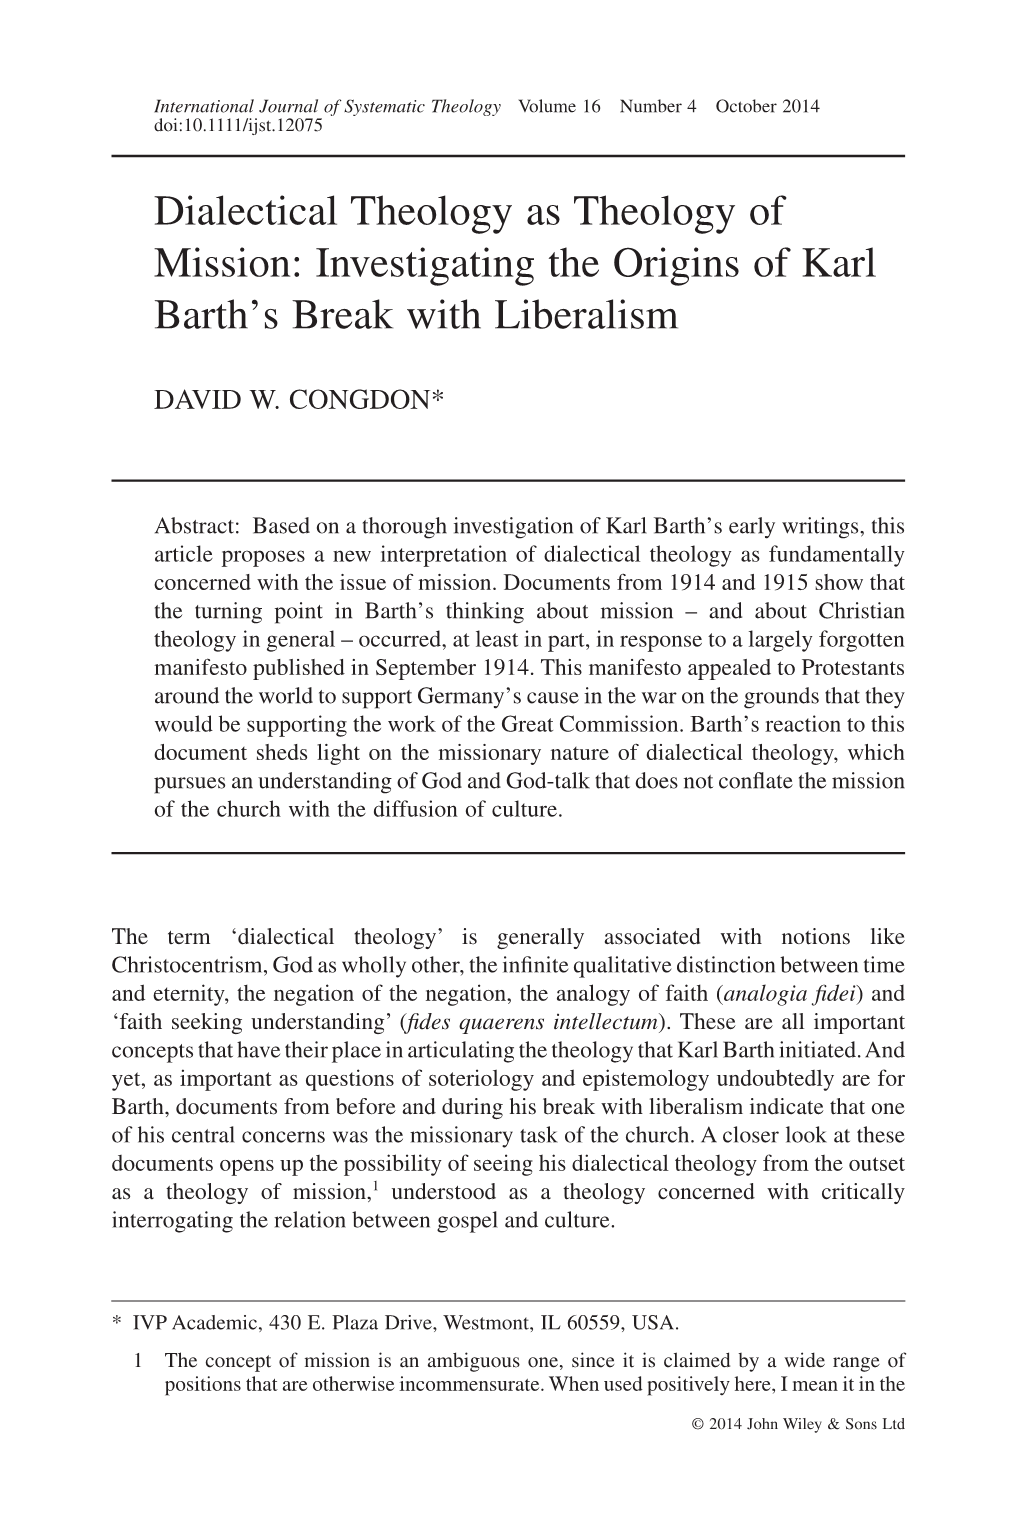 Dialectical Theology As Theology of Mission: Investigating the Origins of Karl Barth’S Break with Liberalism